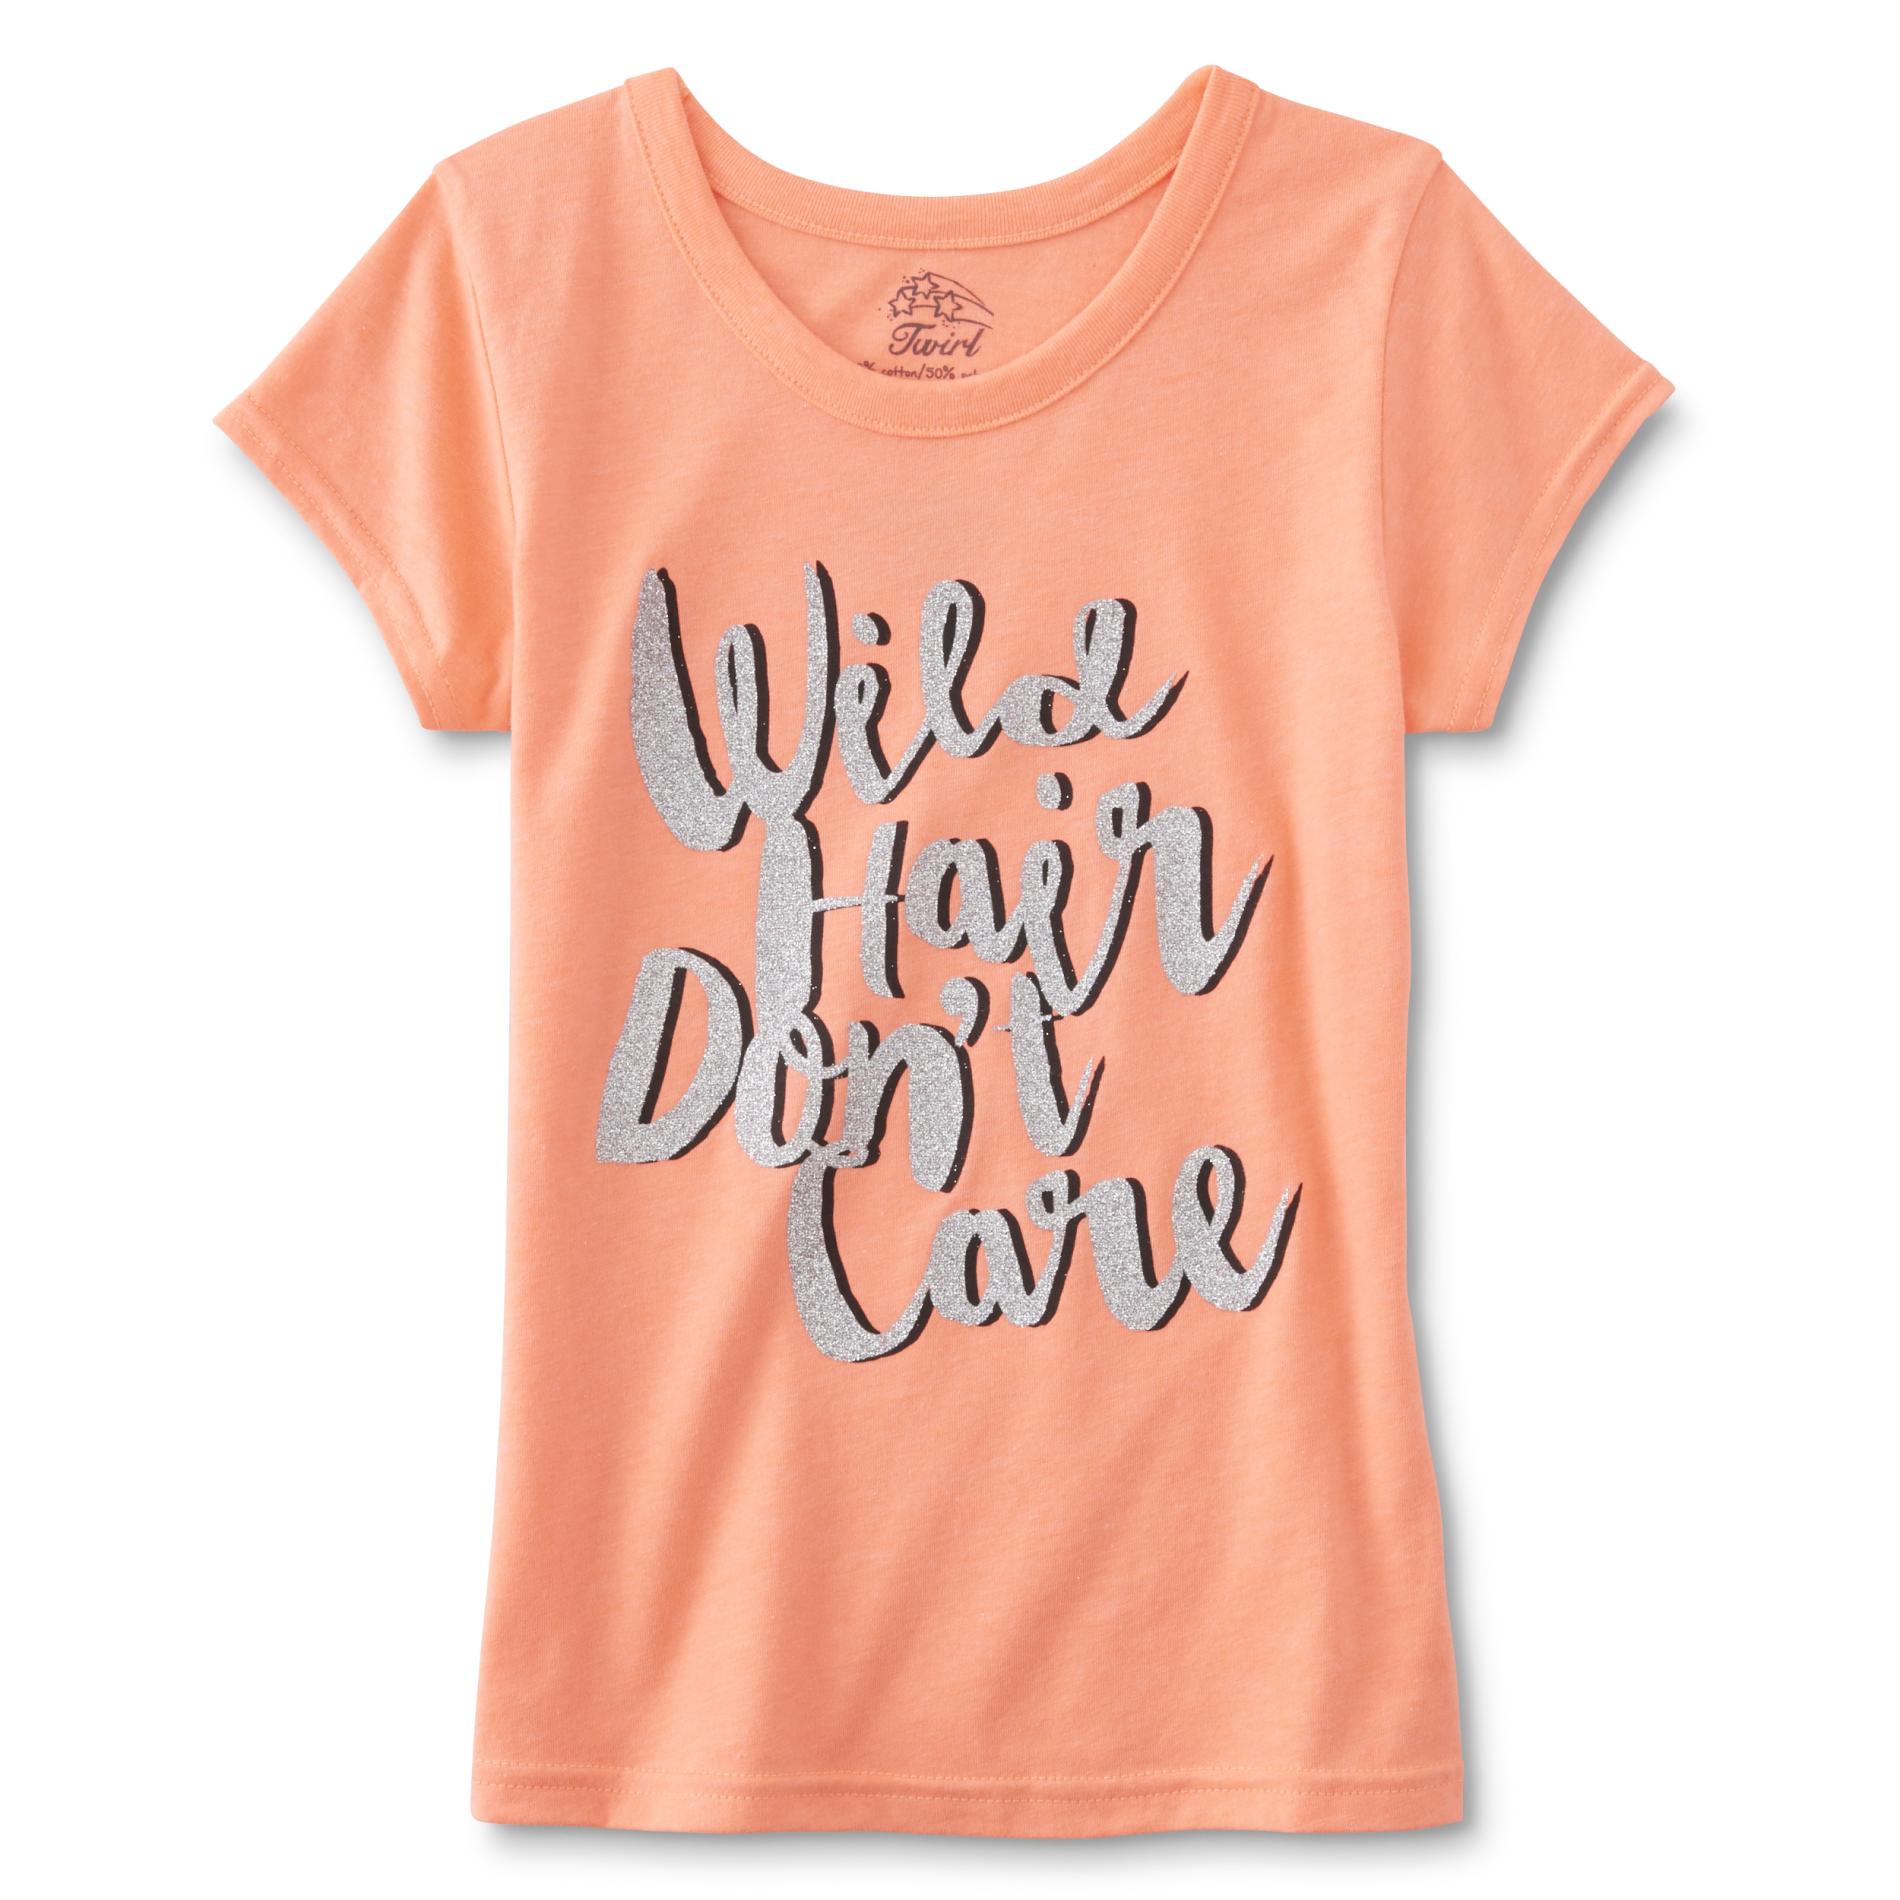 Girls' Graphic T-Shirt - Wild Hair Don't Care